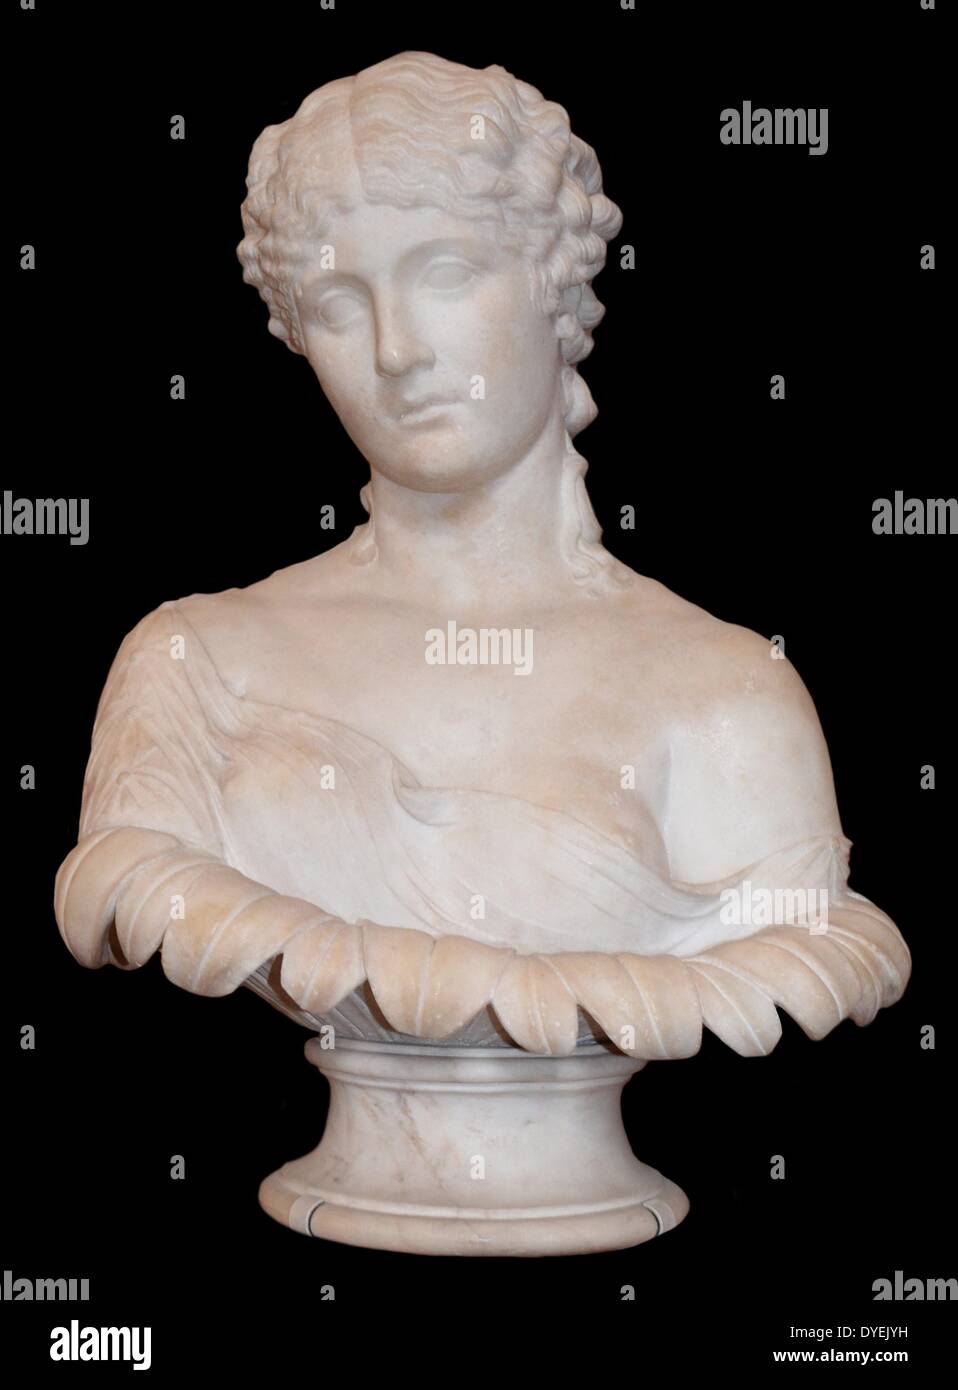 Marble Bust Portrait of Clytie 47 A.D. The bust depicts a woman emerging from a calyx of leaves. The woman is thought to have been a nymph whom had fallen in love with the God Helios and was subsequently turned into a sunflower. Stock Photo